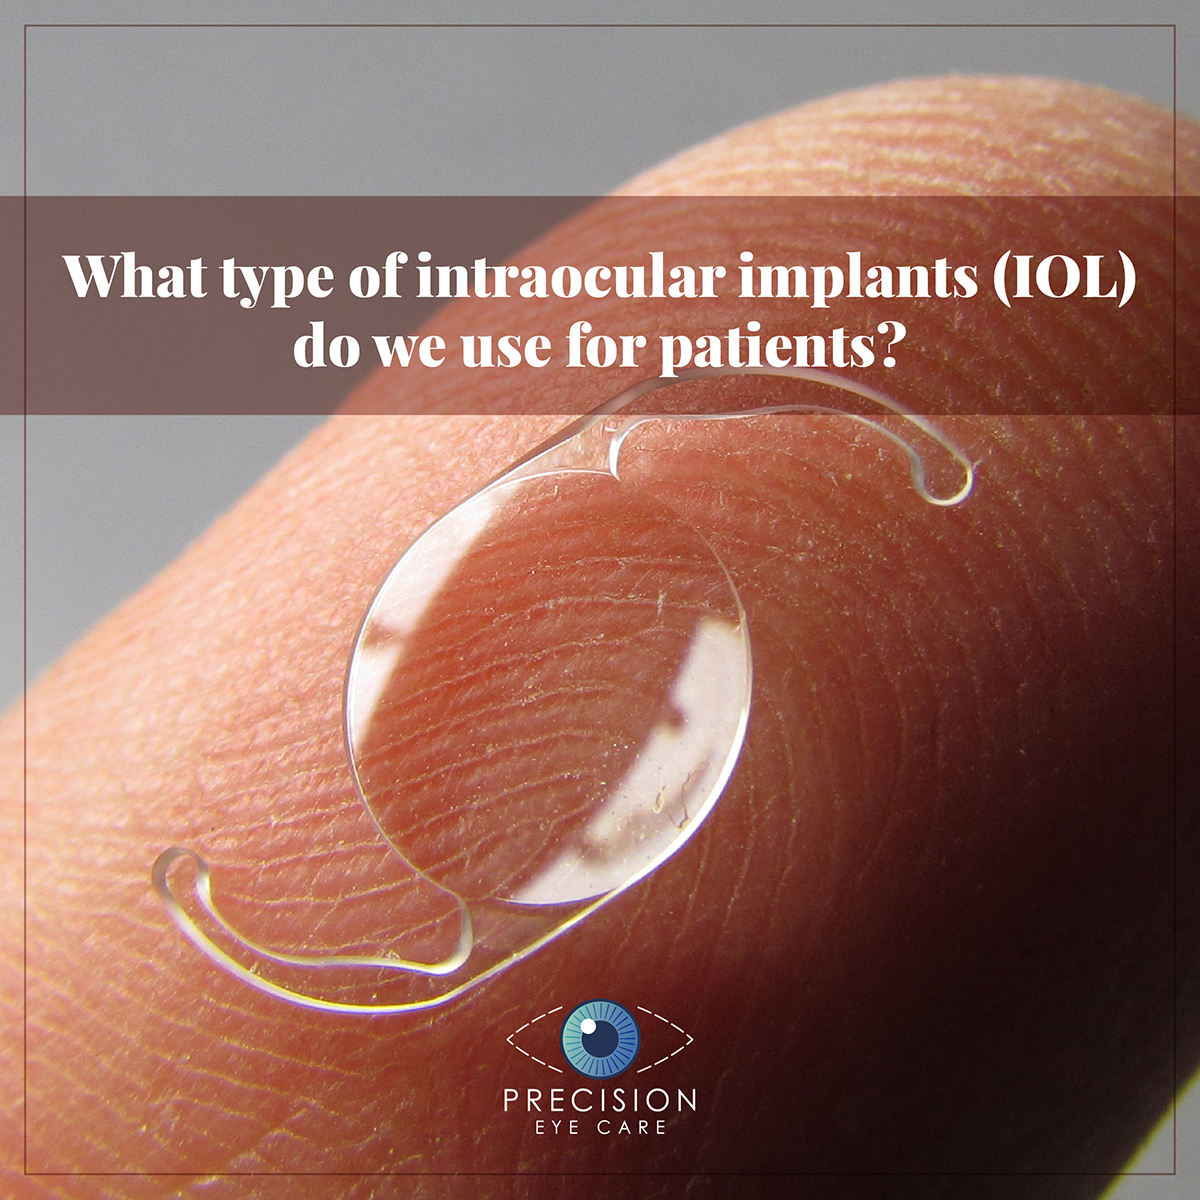 What type of intraocular implants (IOL) do we use for patients?